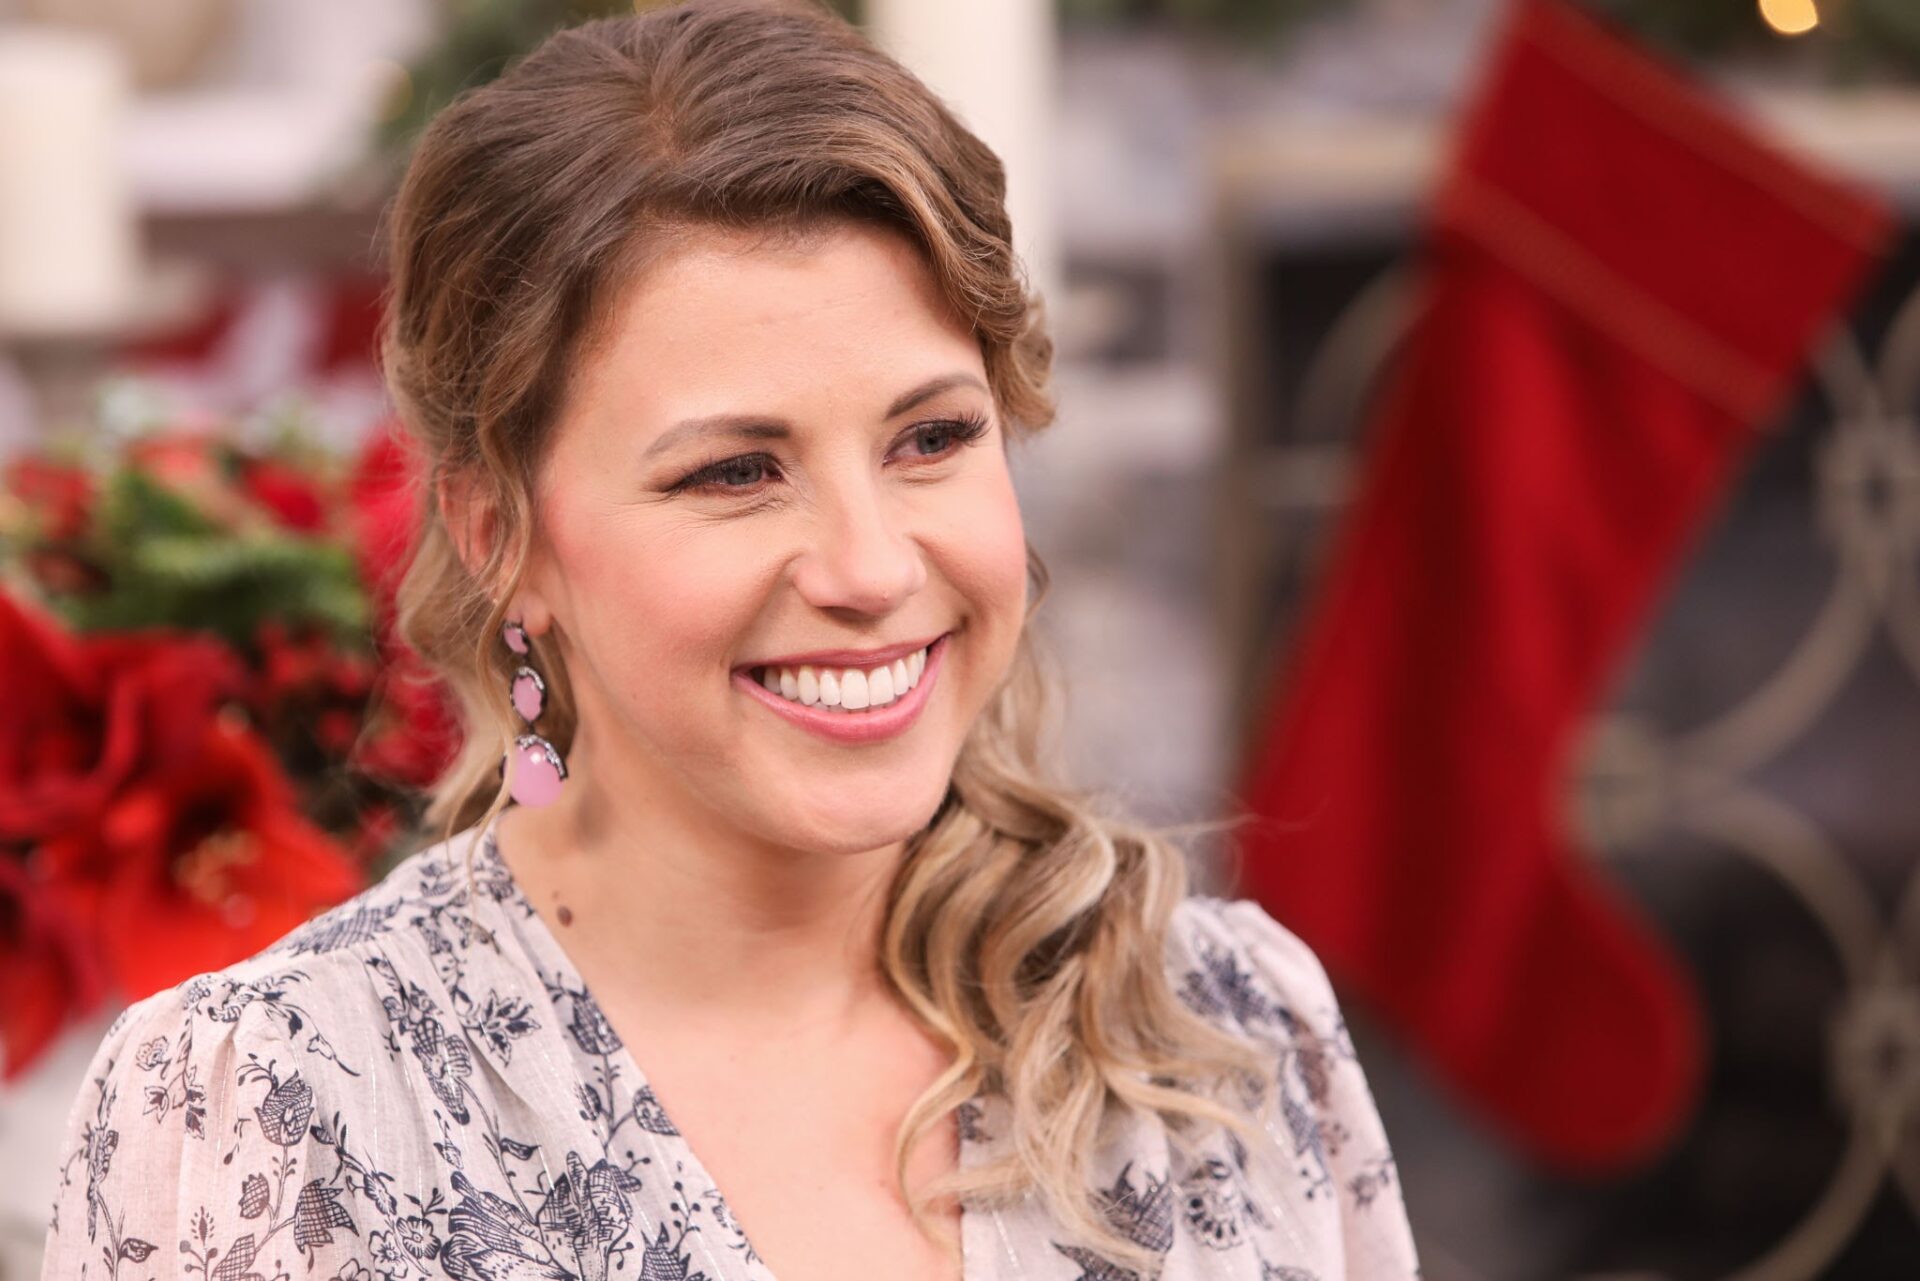 Jodie Sweetin Biography: Age, Net Worth, Spouse, Instagram, Height, Parents, Siblings, Children, Wiki, Awards, Movies